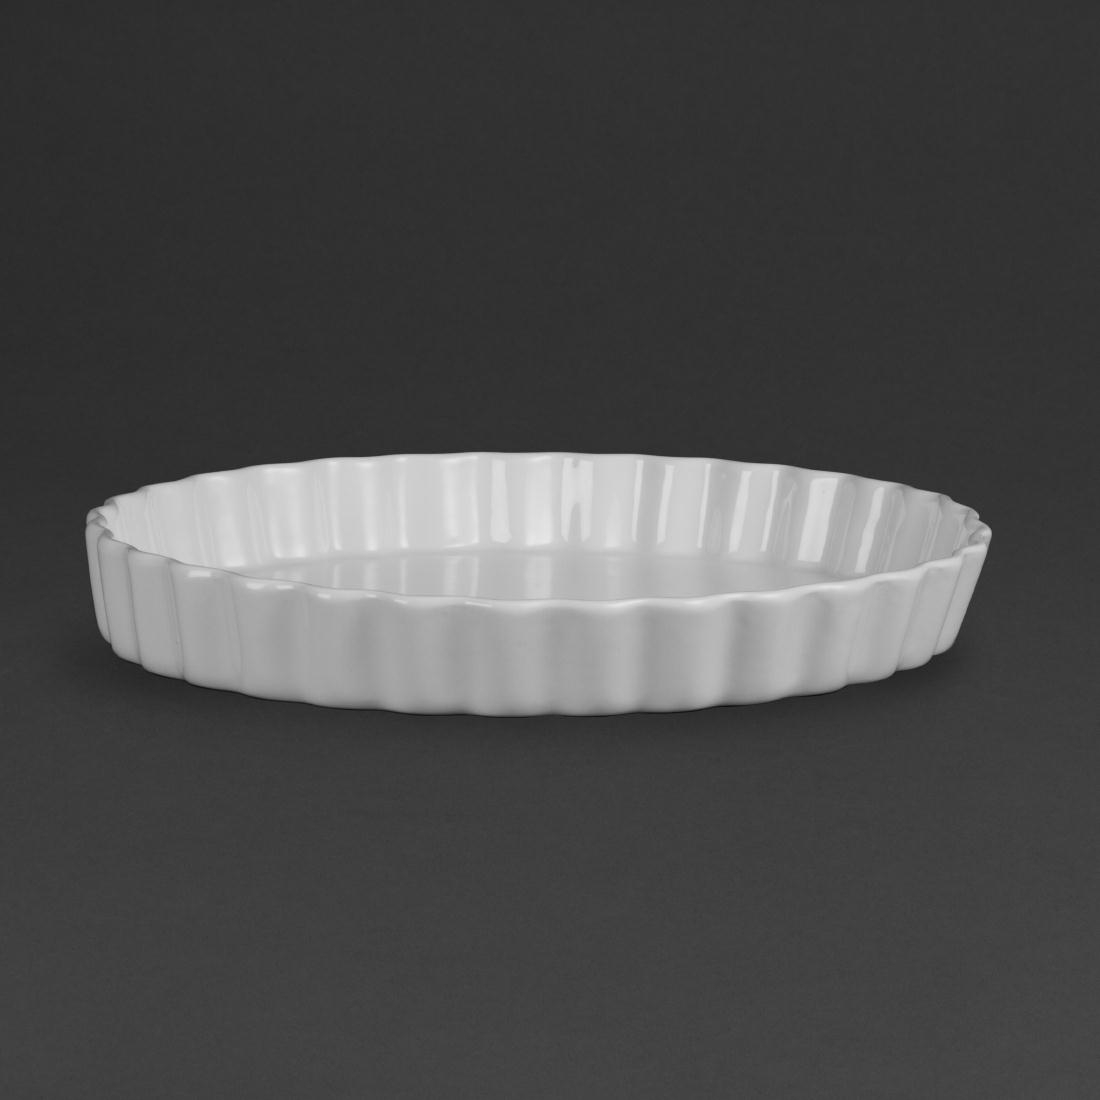 Olympia Whiteware Flan Dishes 297mm